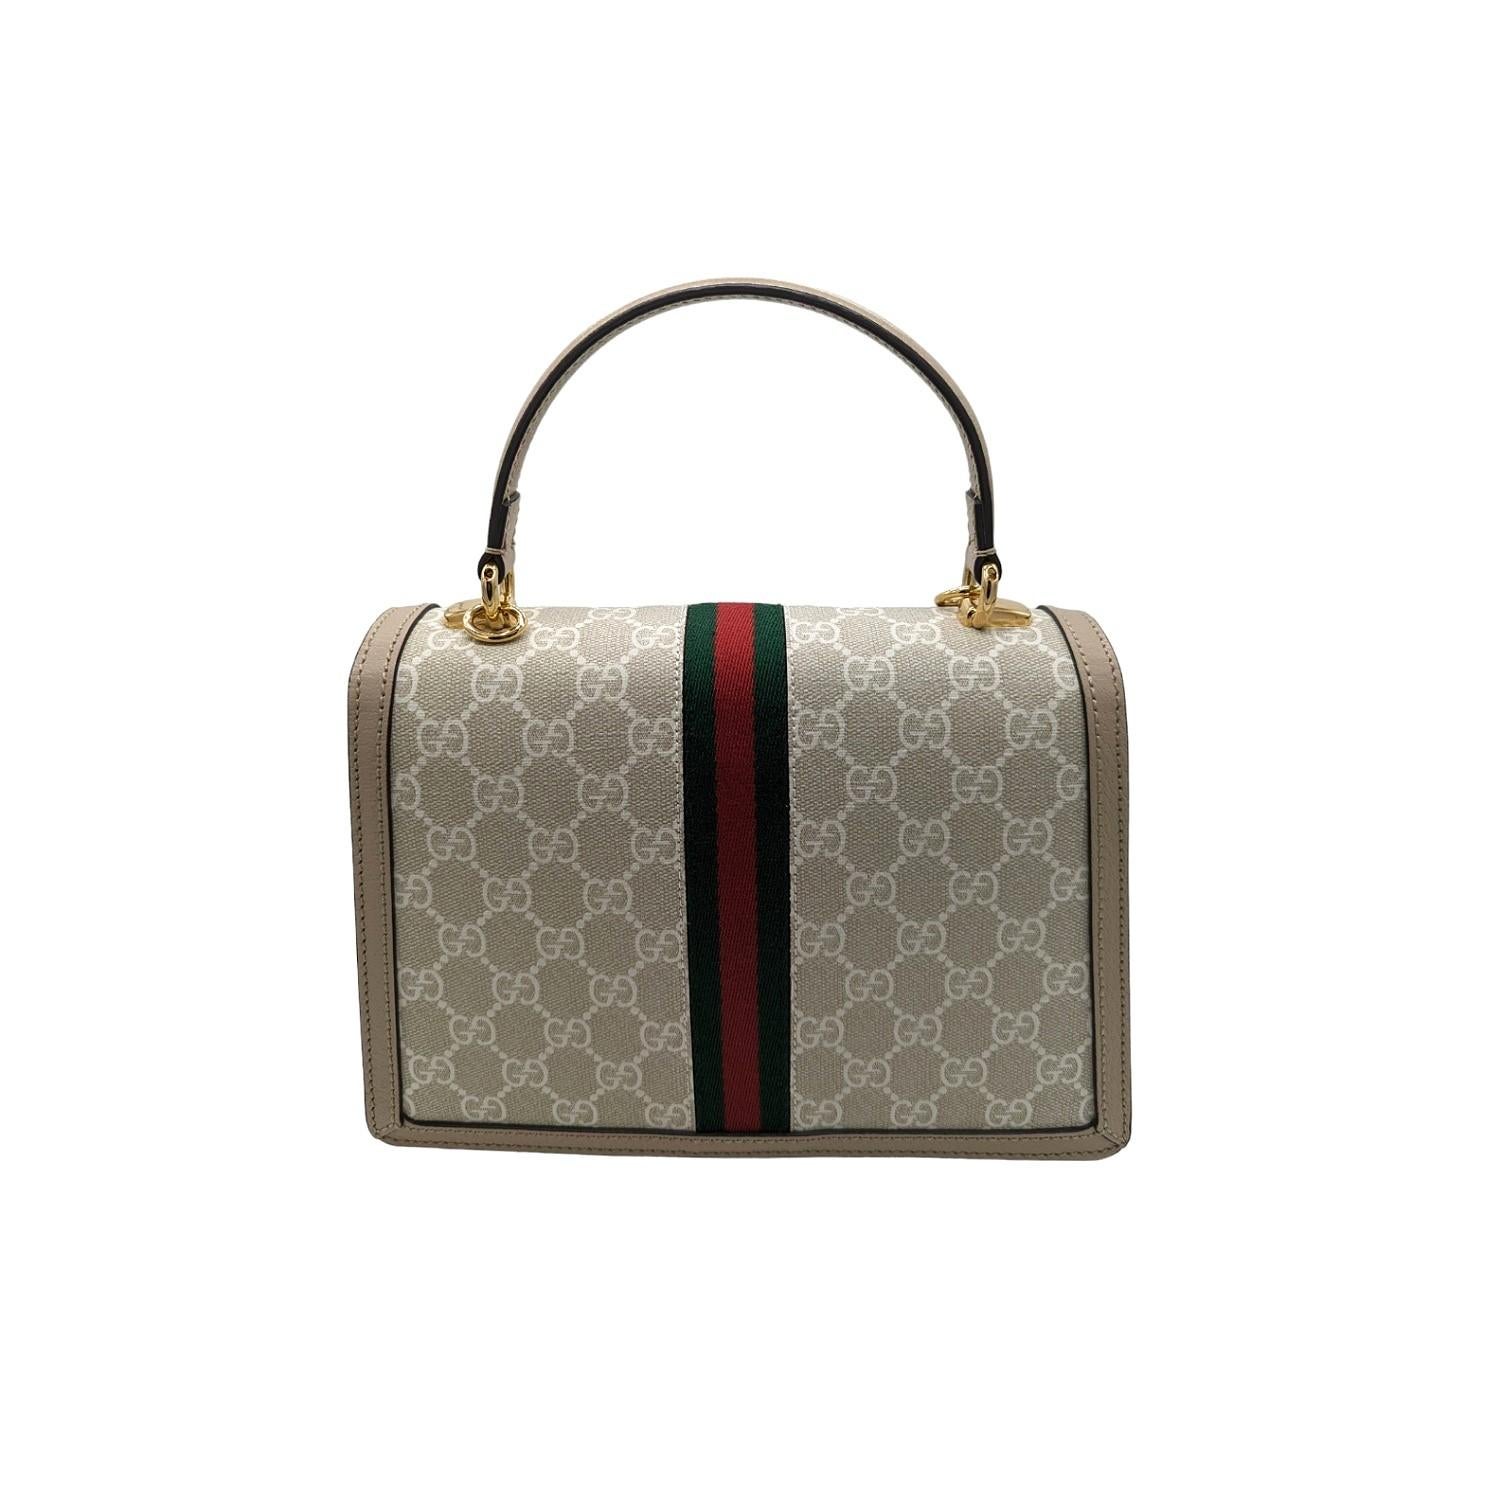 Gucci GG Supreme Small Ophidia Top Handle Bag In Excellent Condition For Sale In Scottsdale, AZ